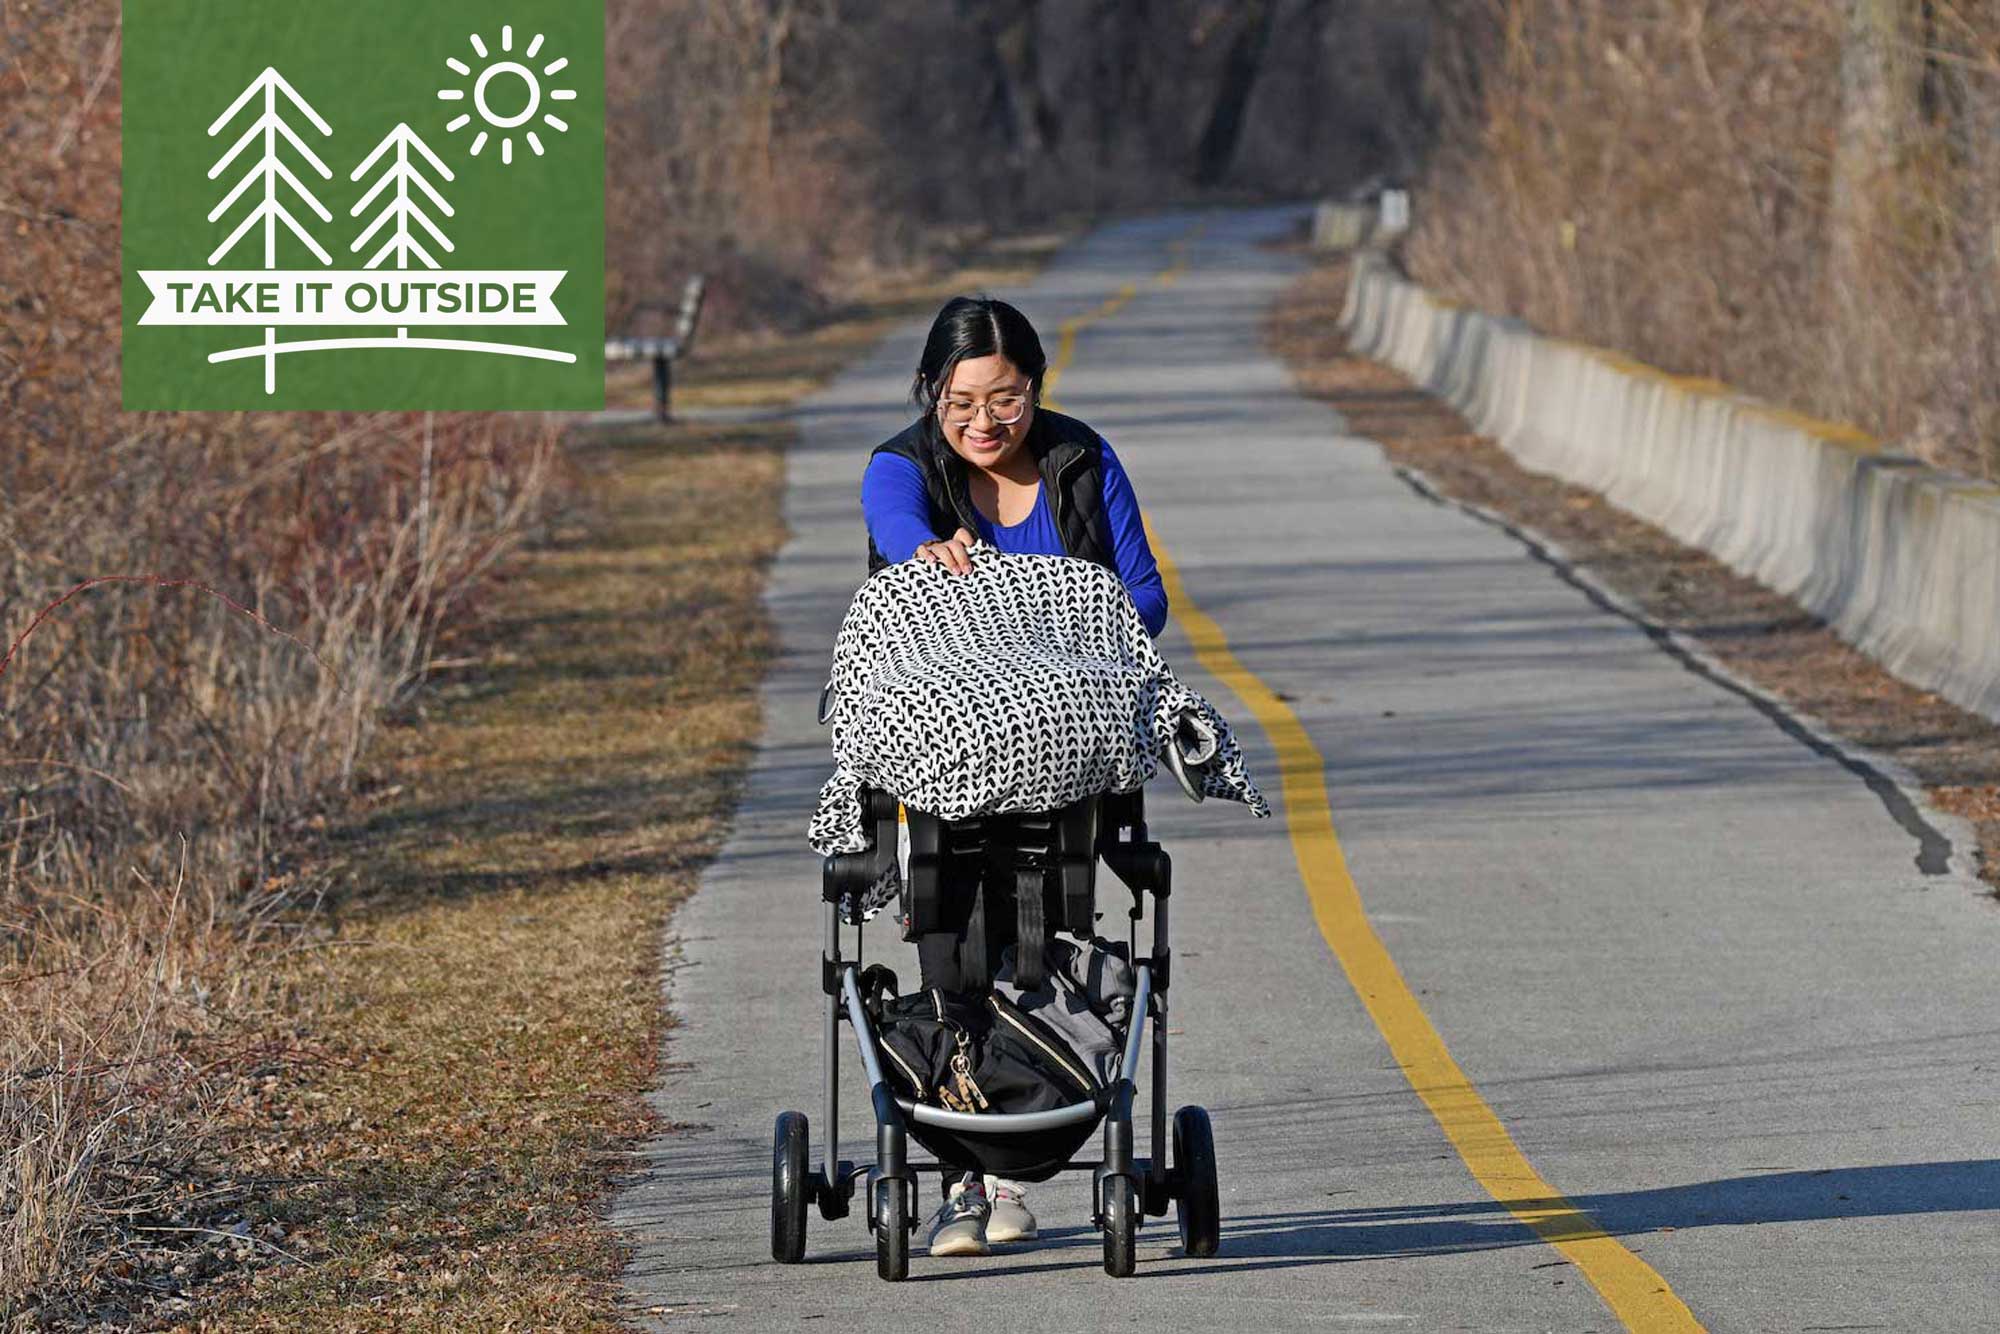 A woman pushing a stroller on a paved trail.